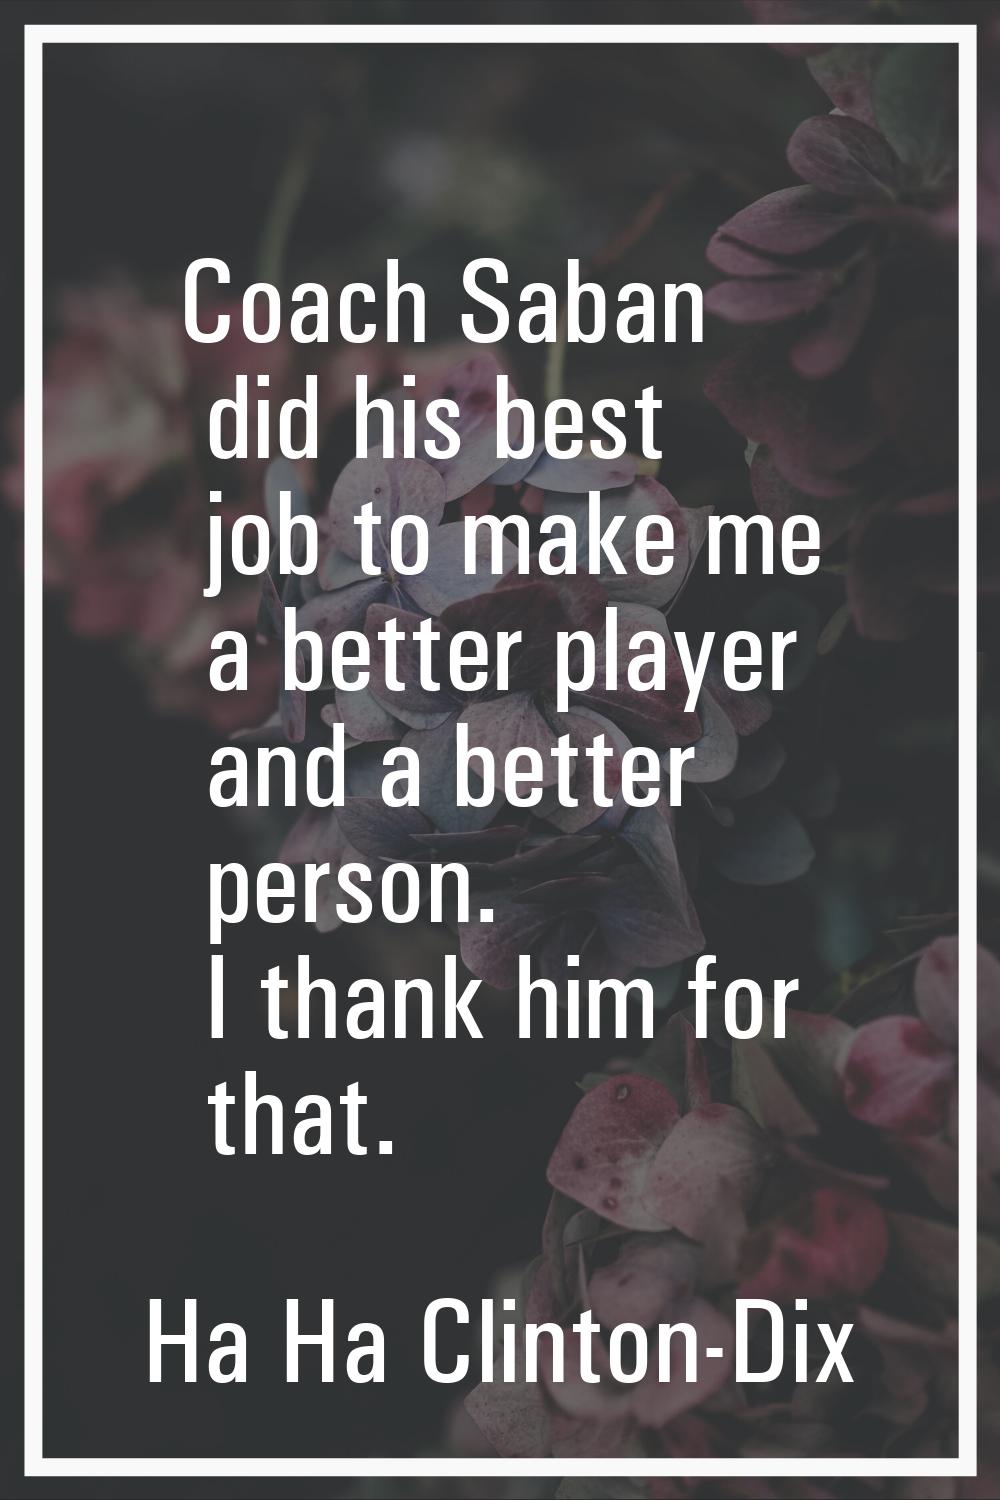 Coach Saban did his best job to make me a better player and a better person. I thank him for that.